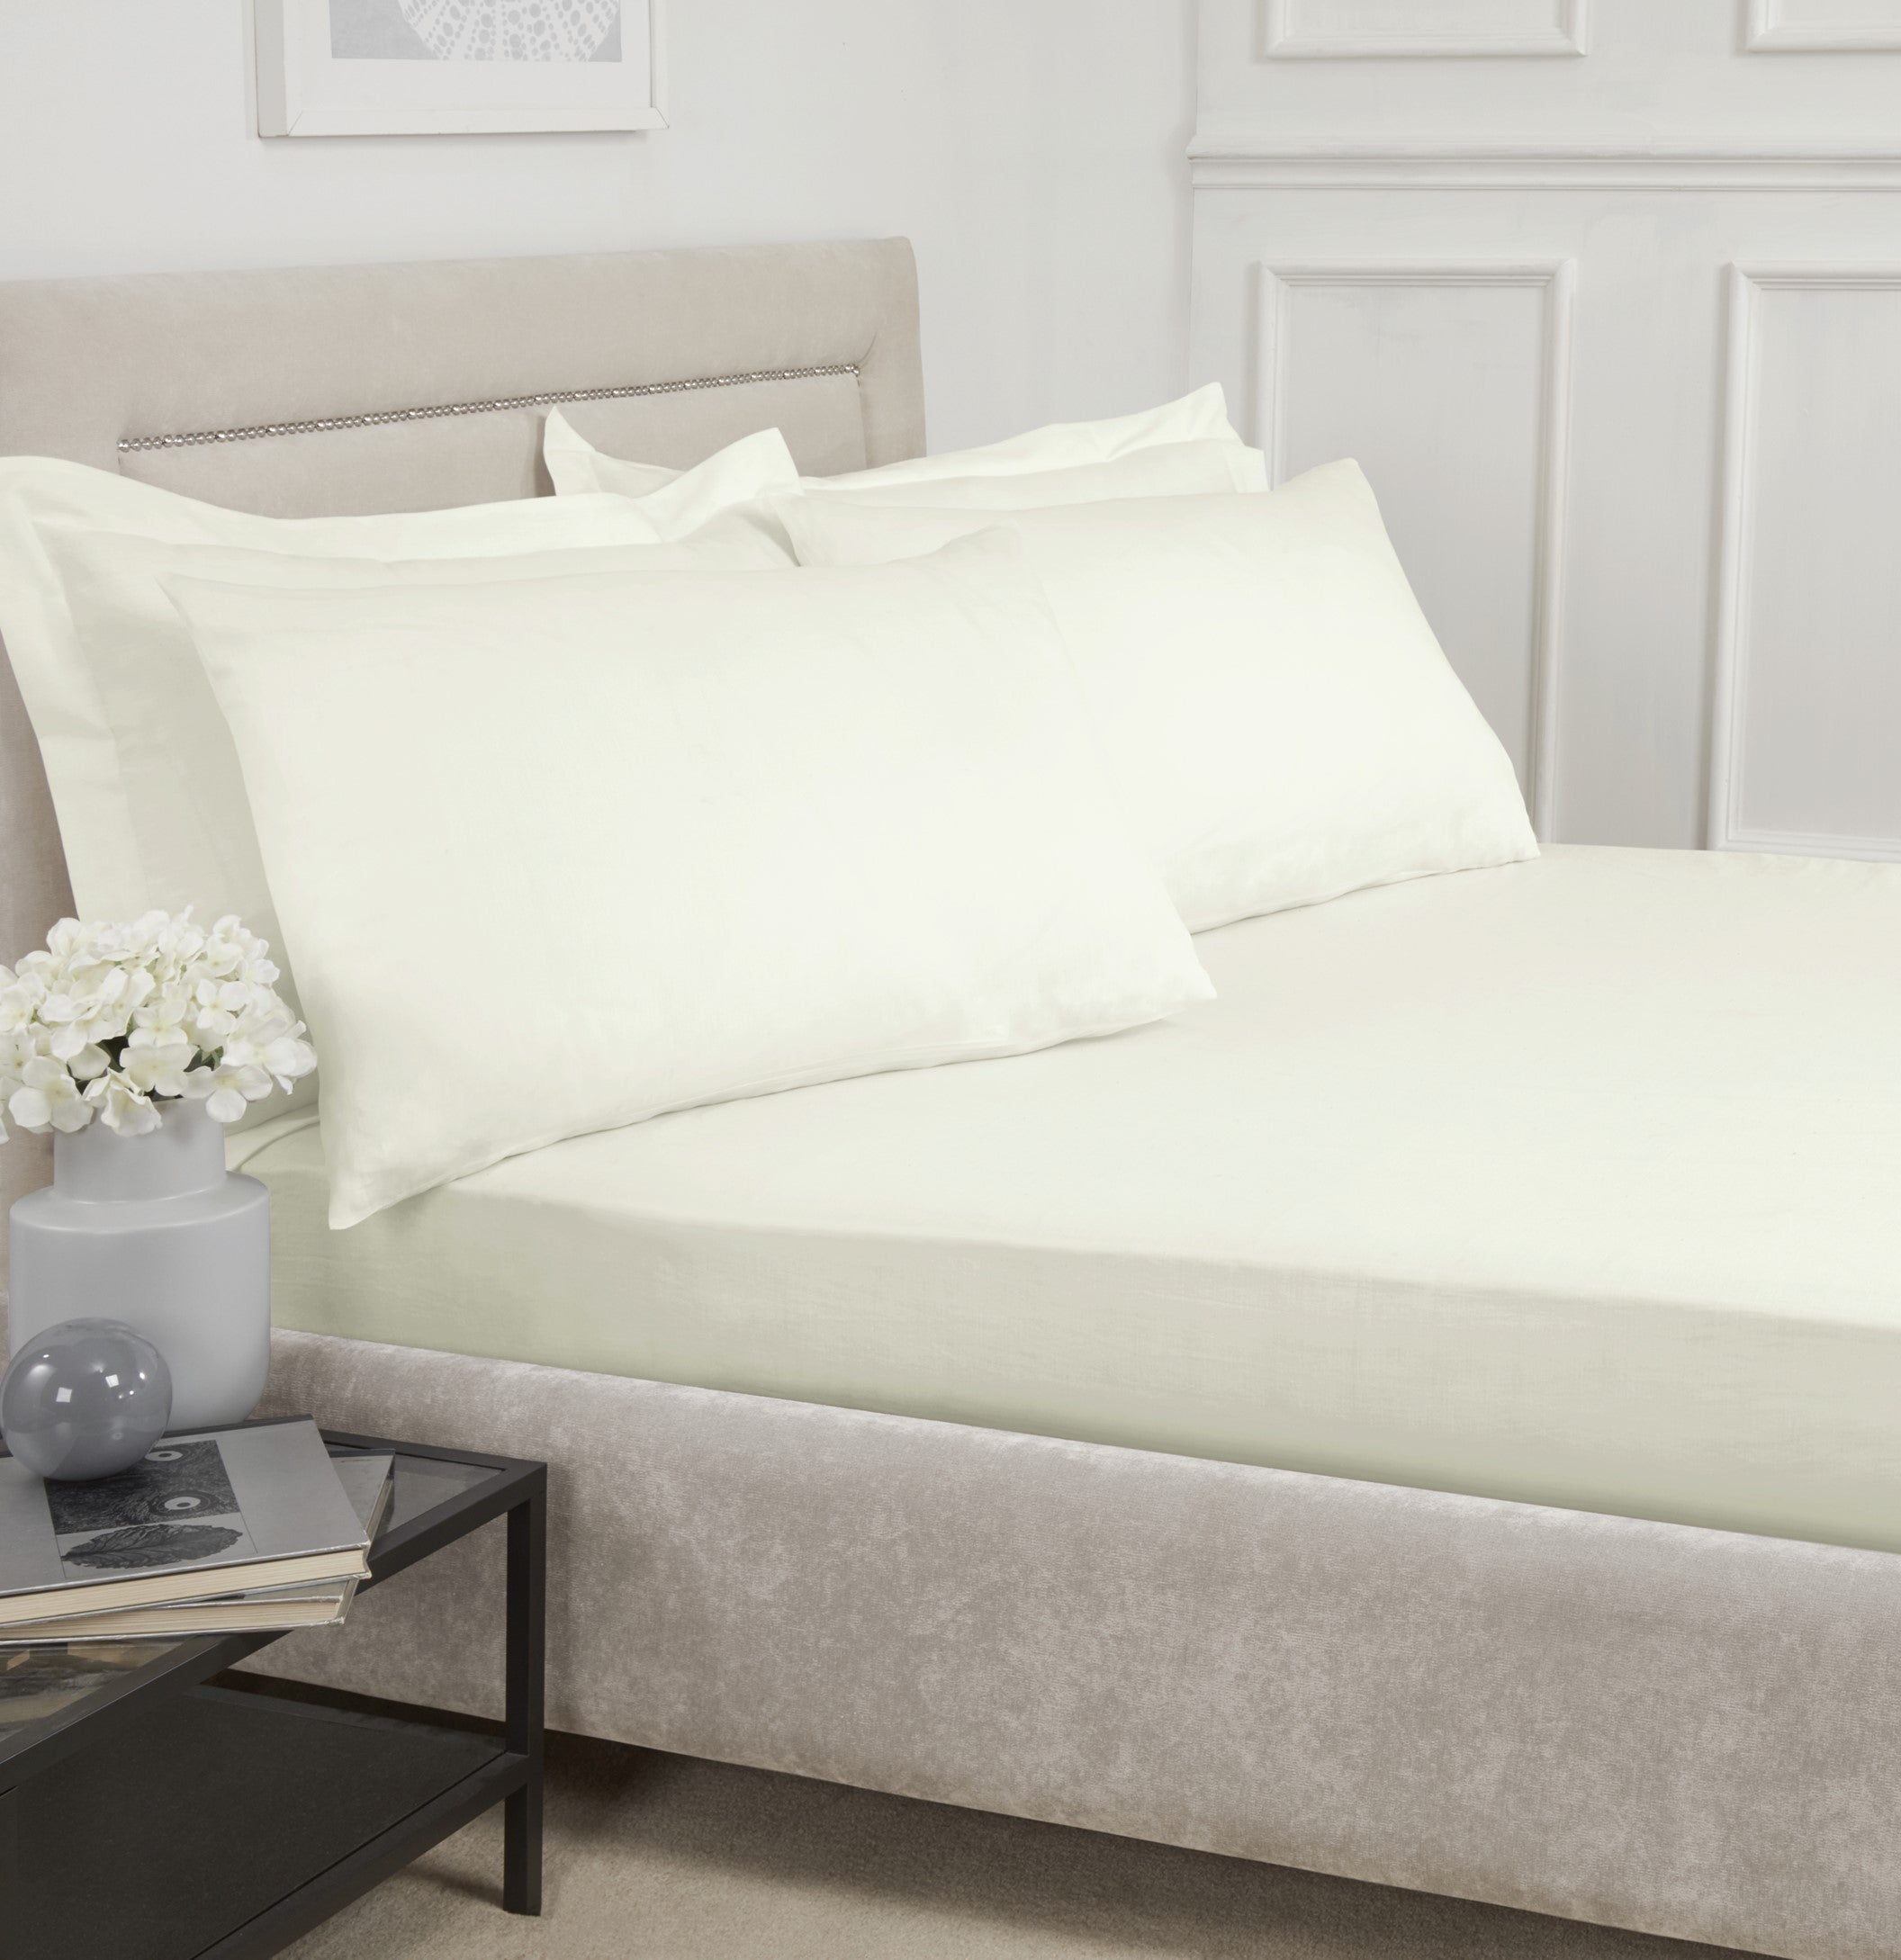 Lewis’s 100% Cotton Fitted Bedding Range - Cream - Double Fitted Sheet  | TJ Hughes